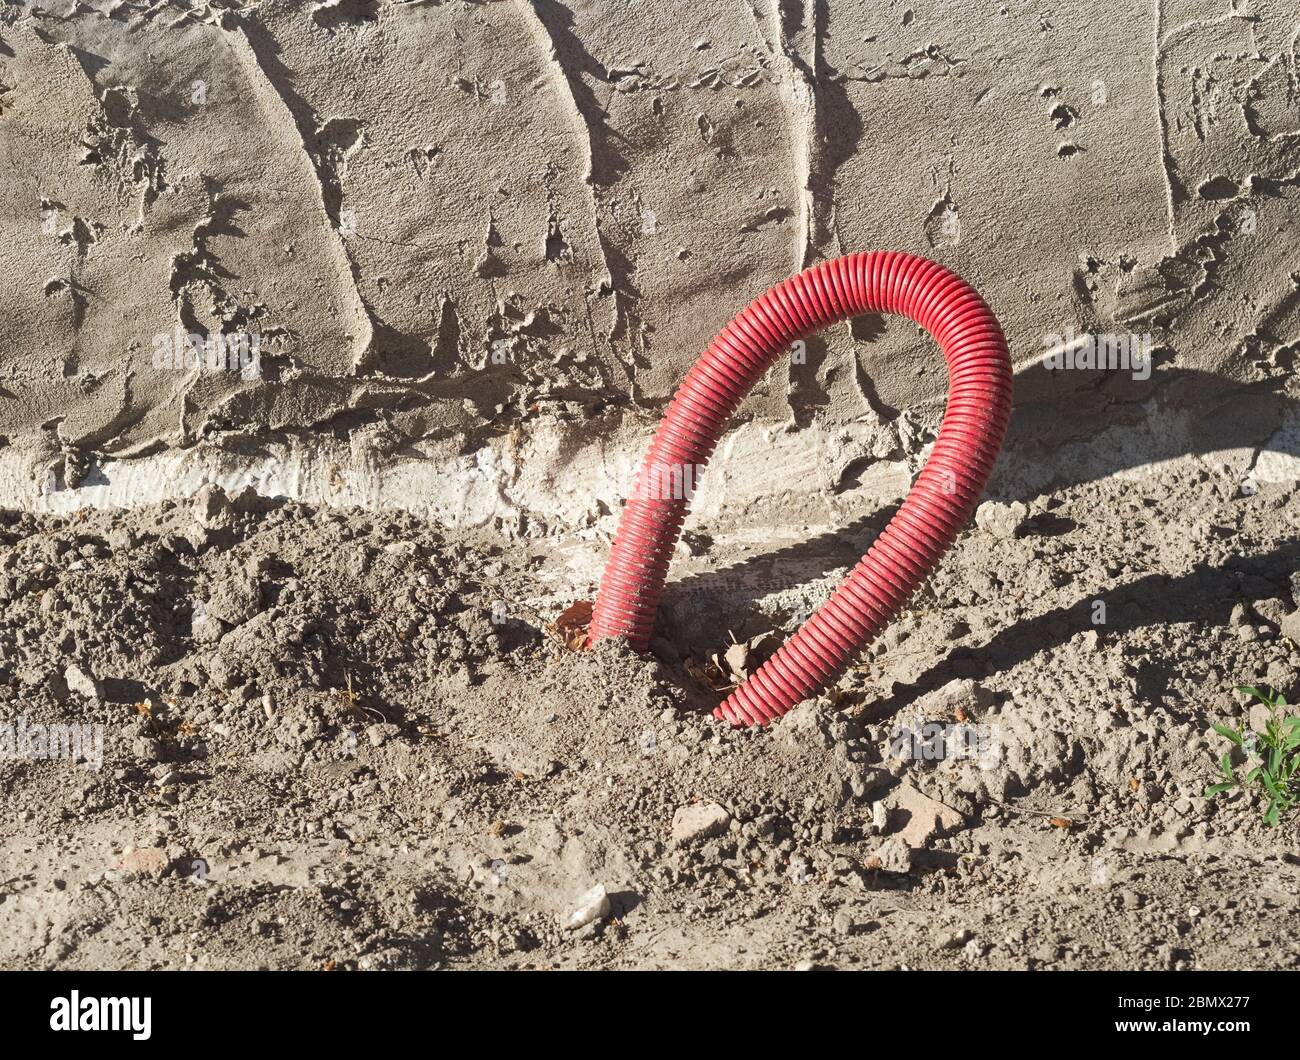 Buried Electric Cable in Red Plastic Pipe Cover Stock Photo